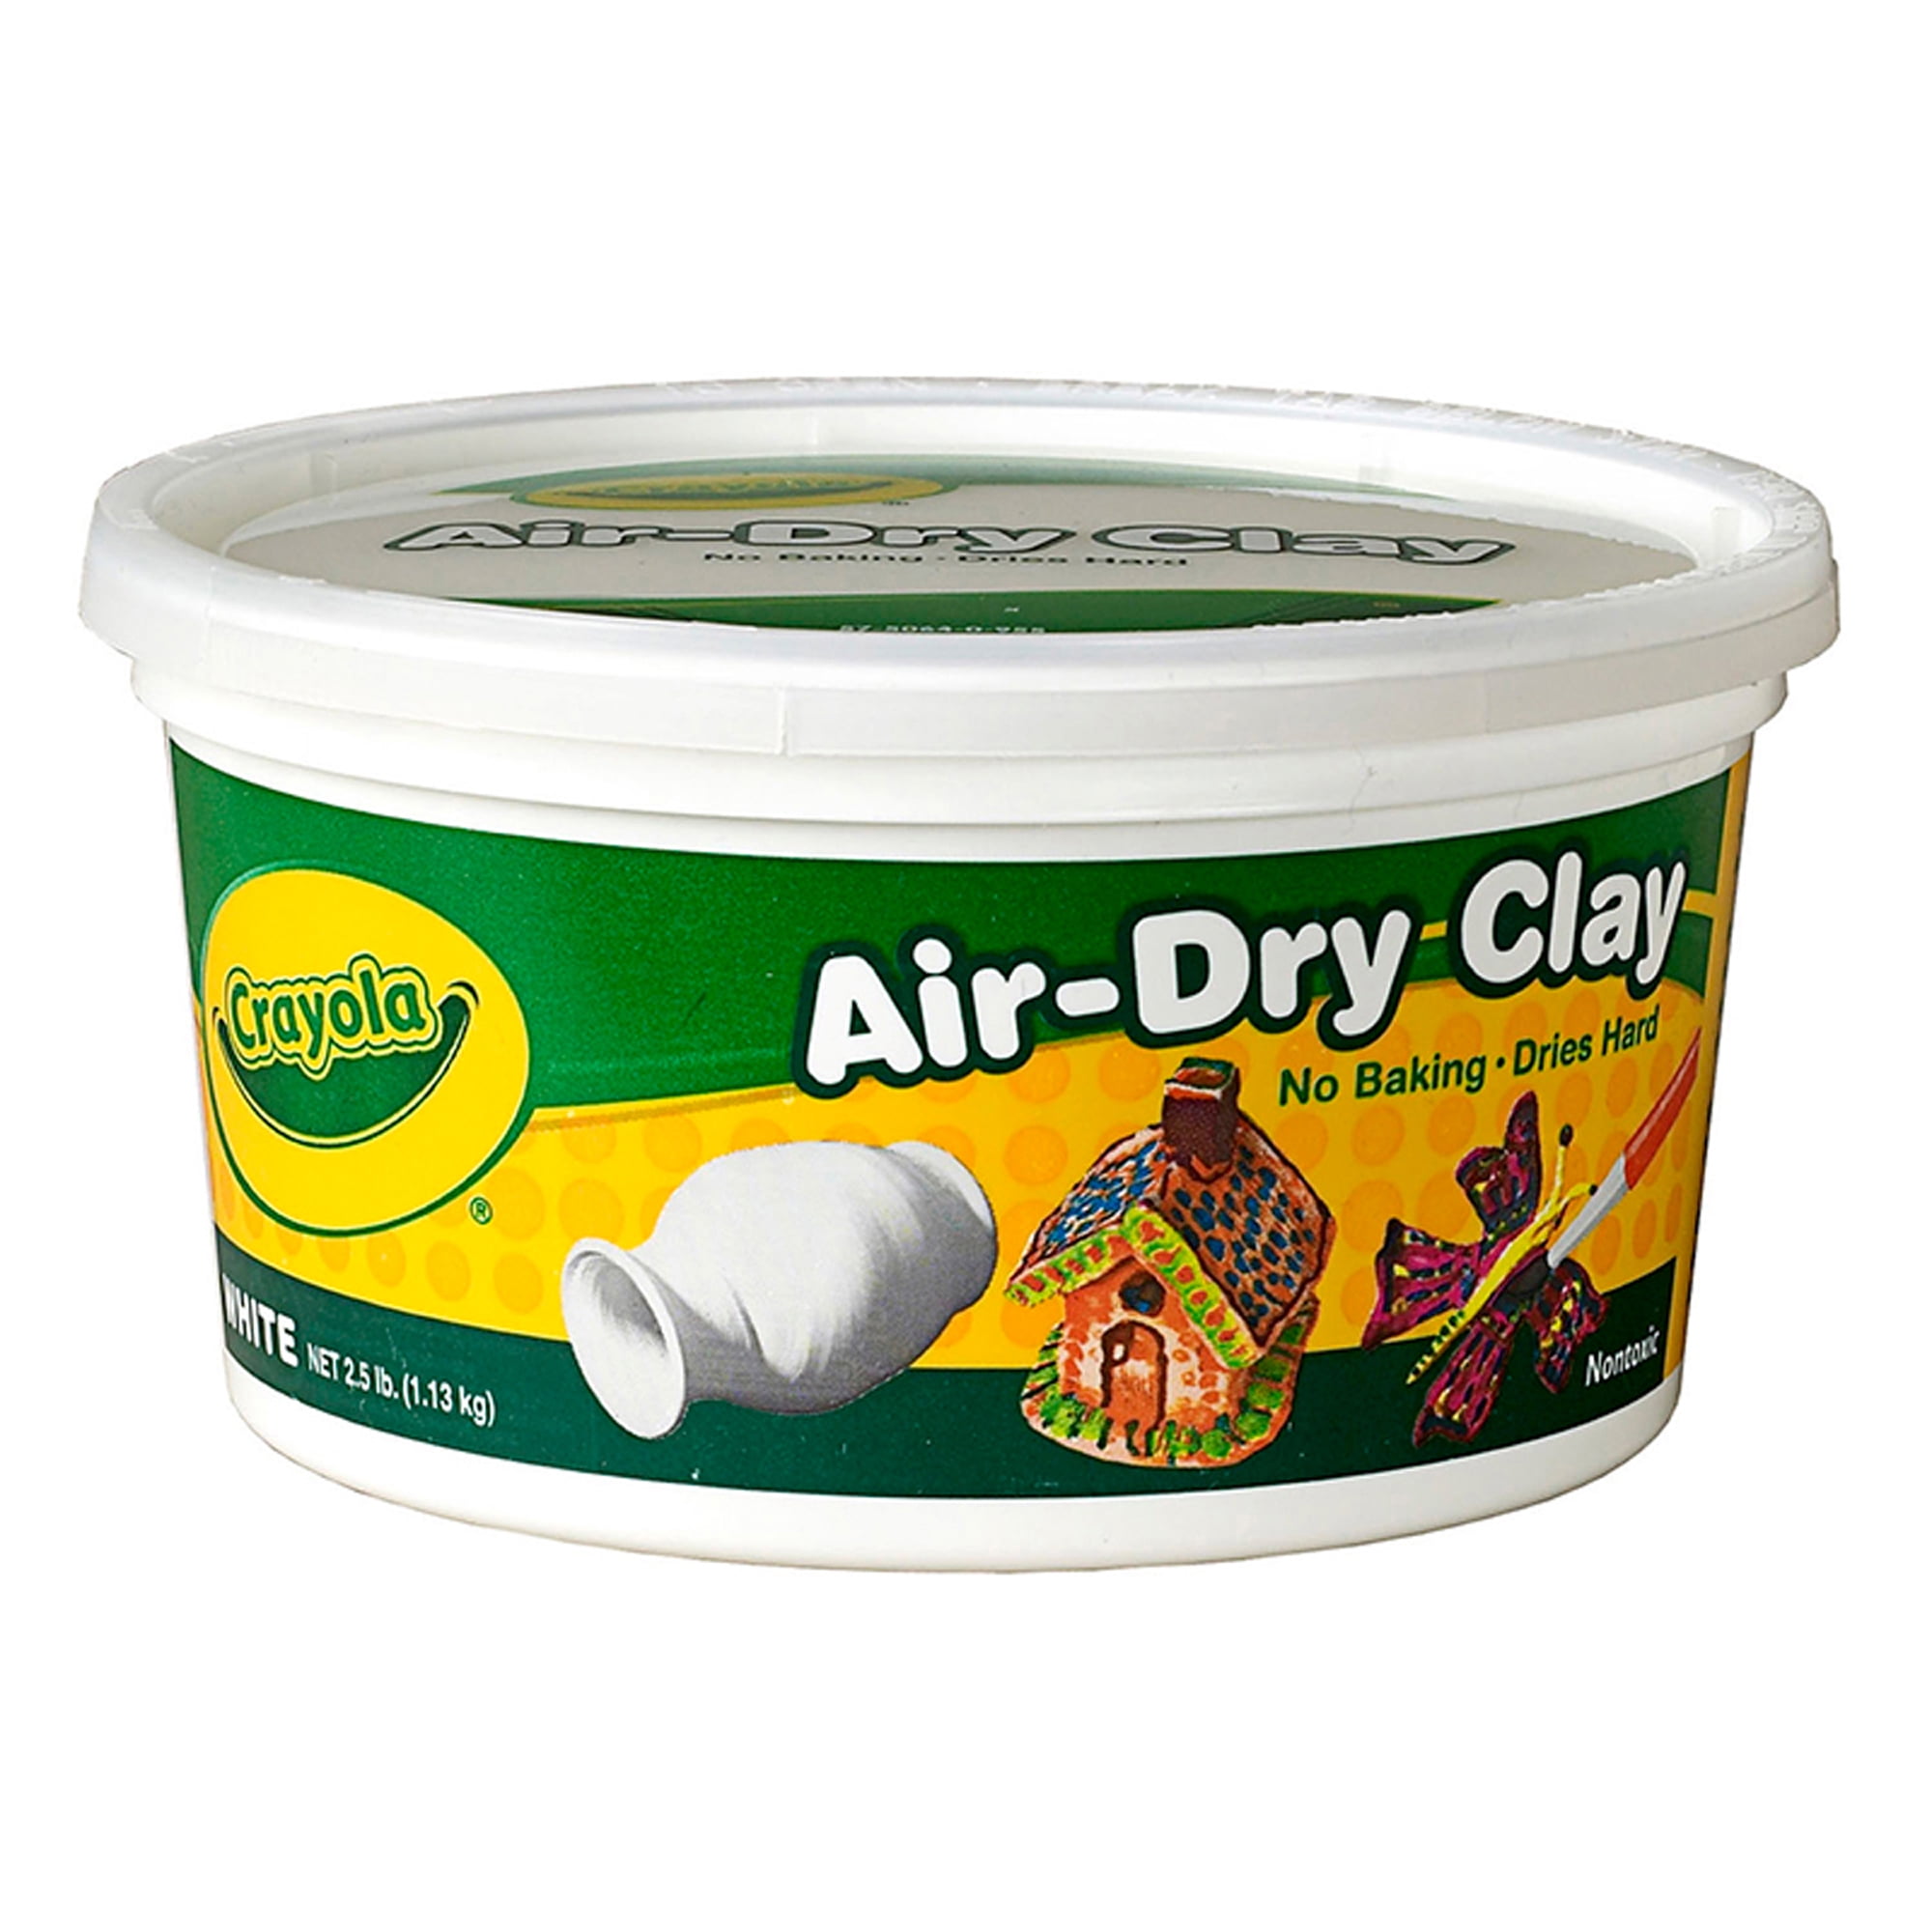 White Pack of 1 Crayola Air Dry Clay 5 Pounds